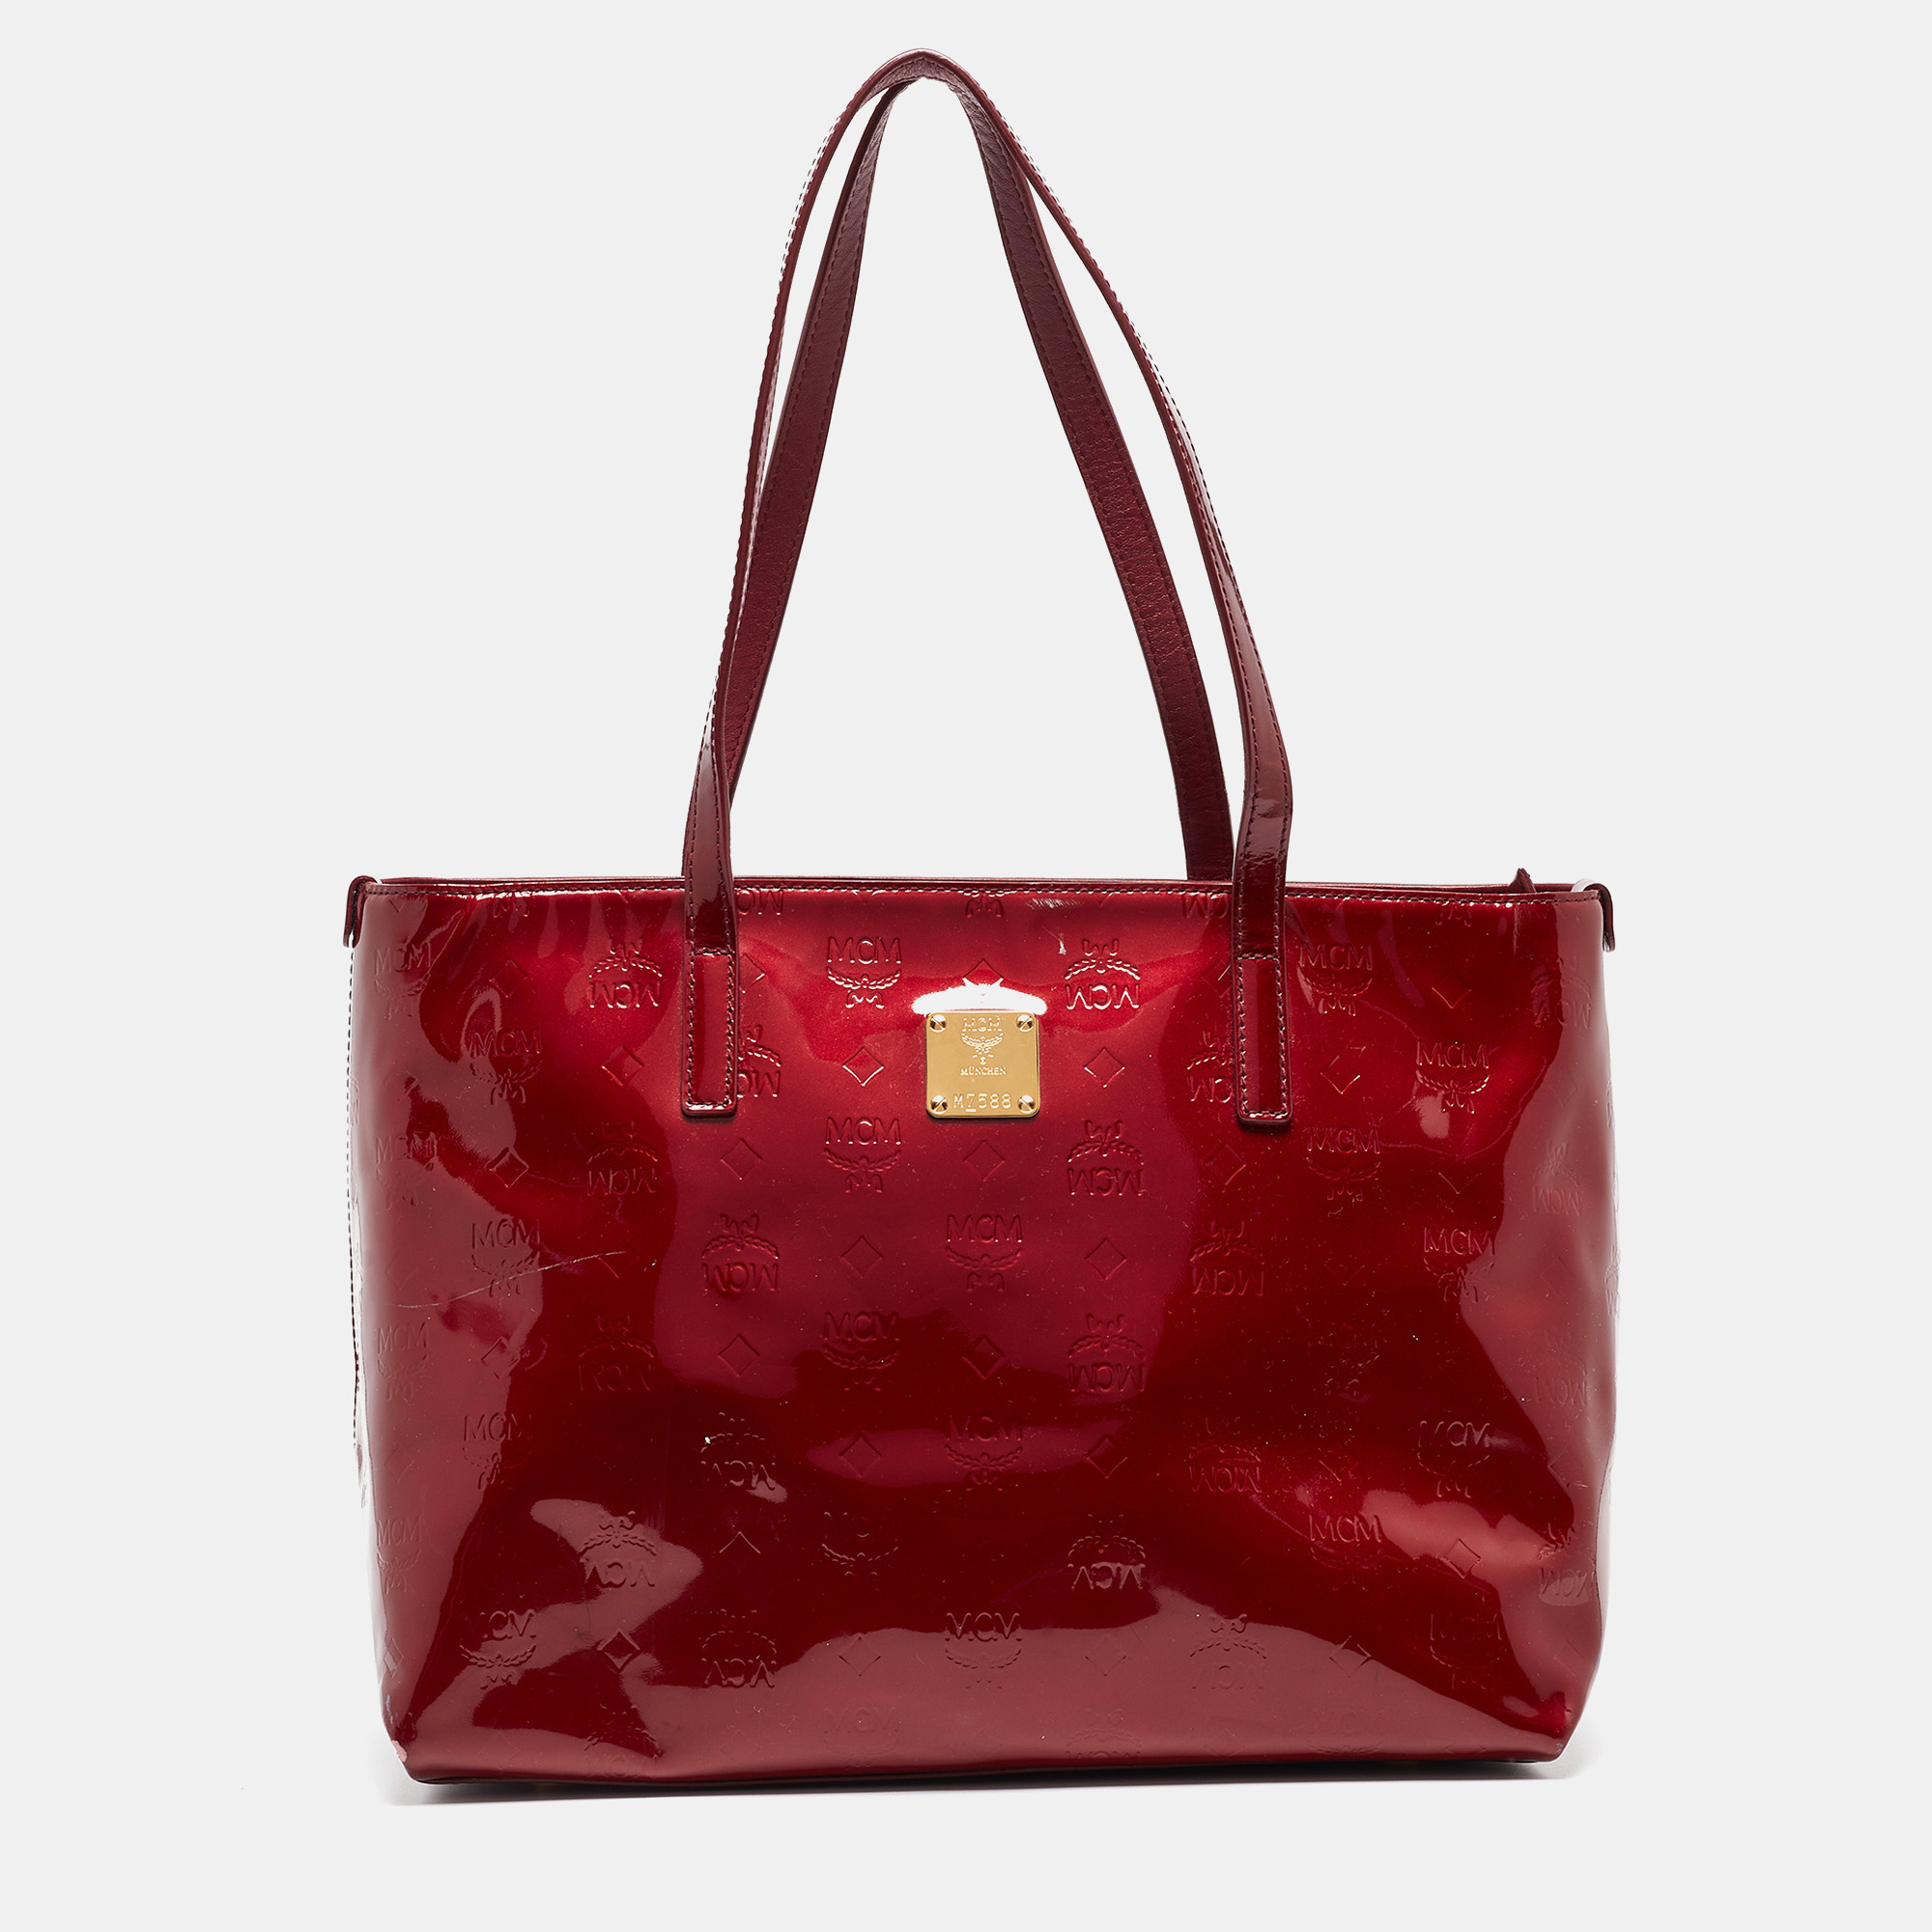 Pre-owned Mcm Dark Red Visetos Patent Leather Tote